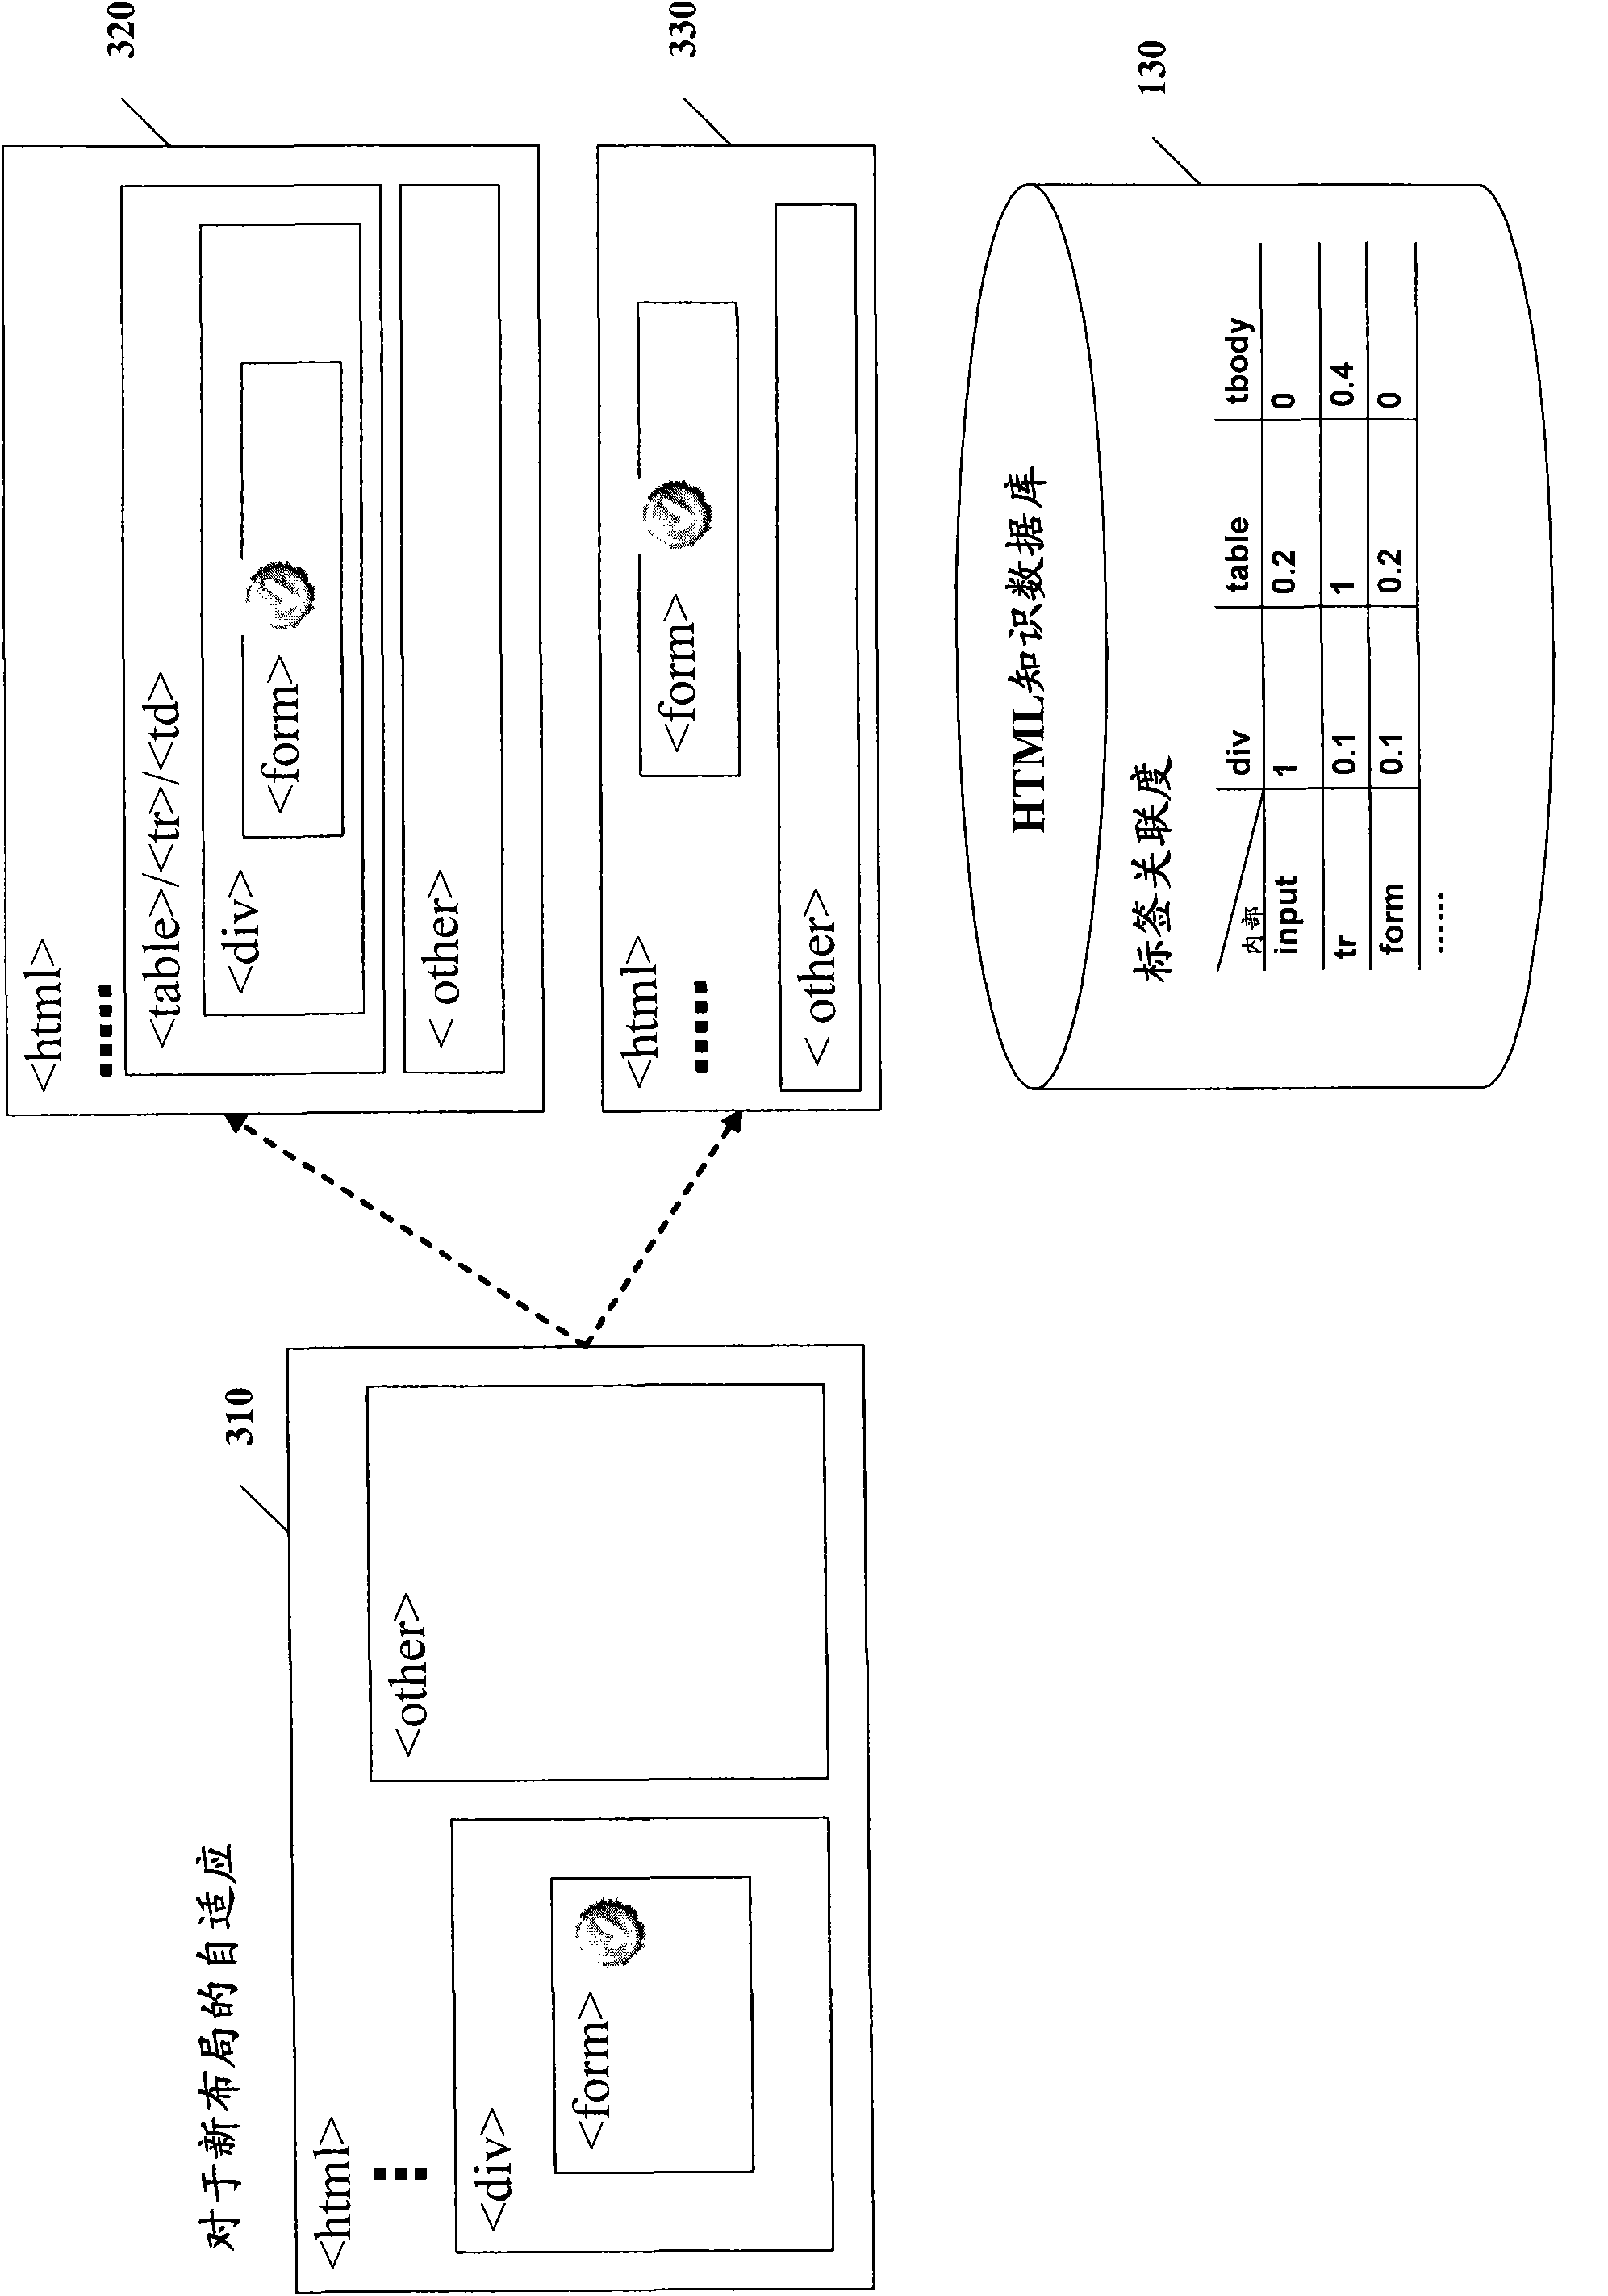 System and method for self-adaptively locating dynamic web page elements